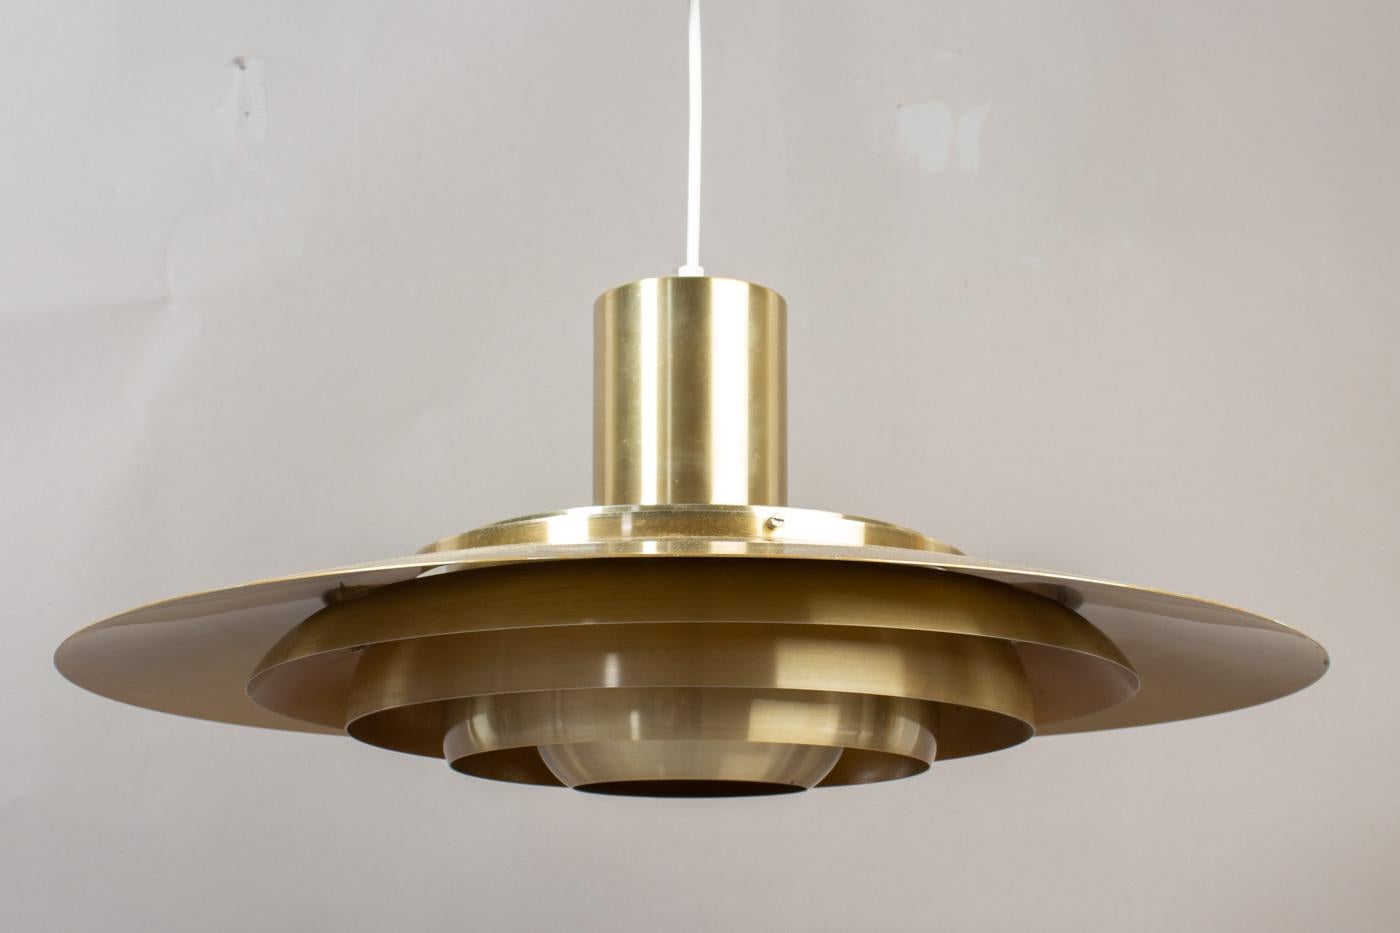 Aluminium pendant brass-plated comprising for five tiers, fitted with one E27 socket up to 200watts. Designed by Preben Fabricius & Jørgen Kastholm for Nordisk Solar Compagni in 1964. This it the biggest one ever produced. Height of the lamp on